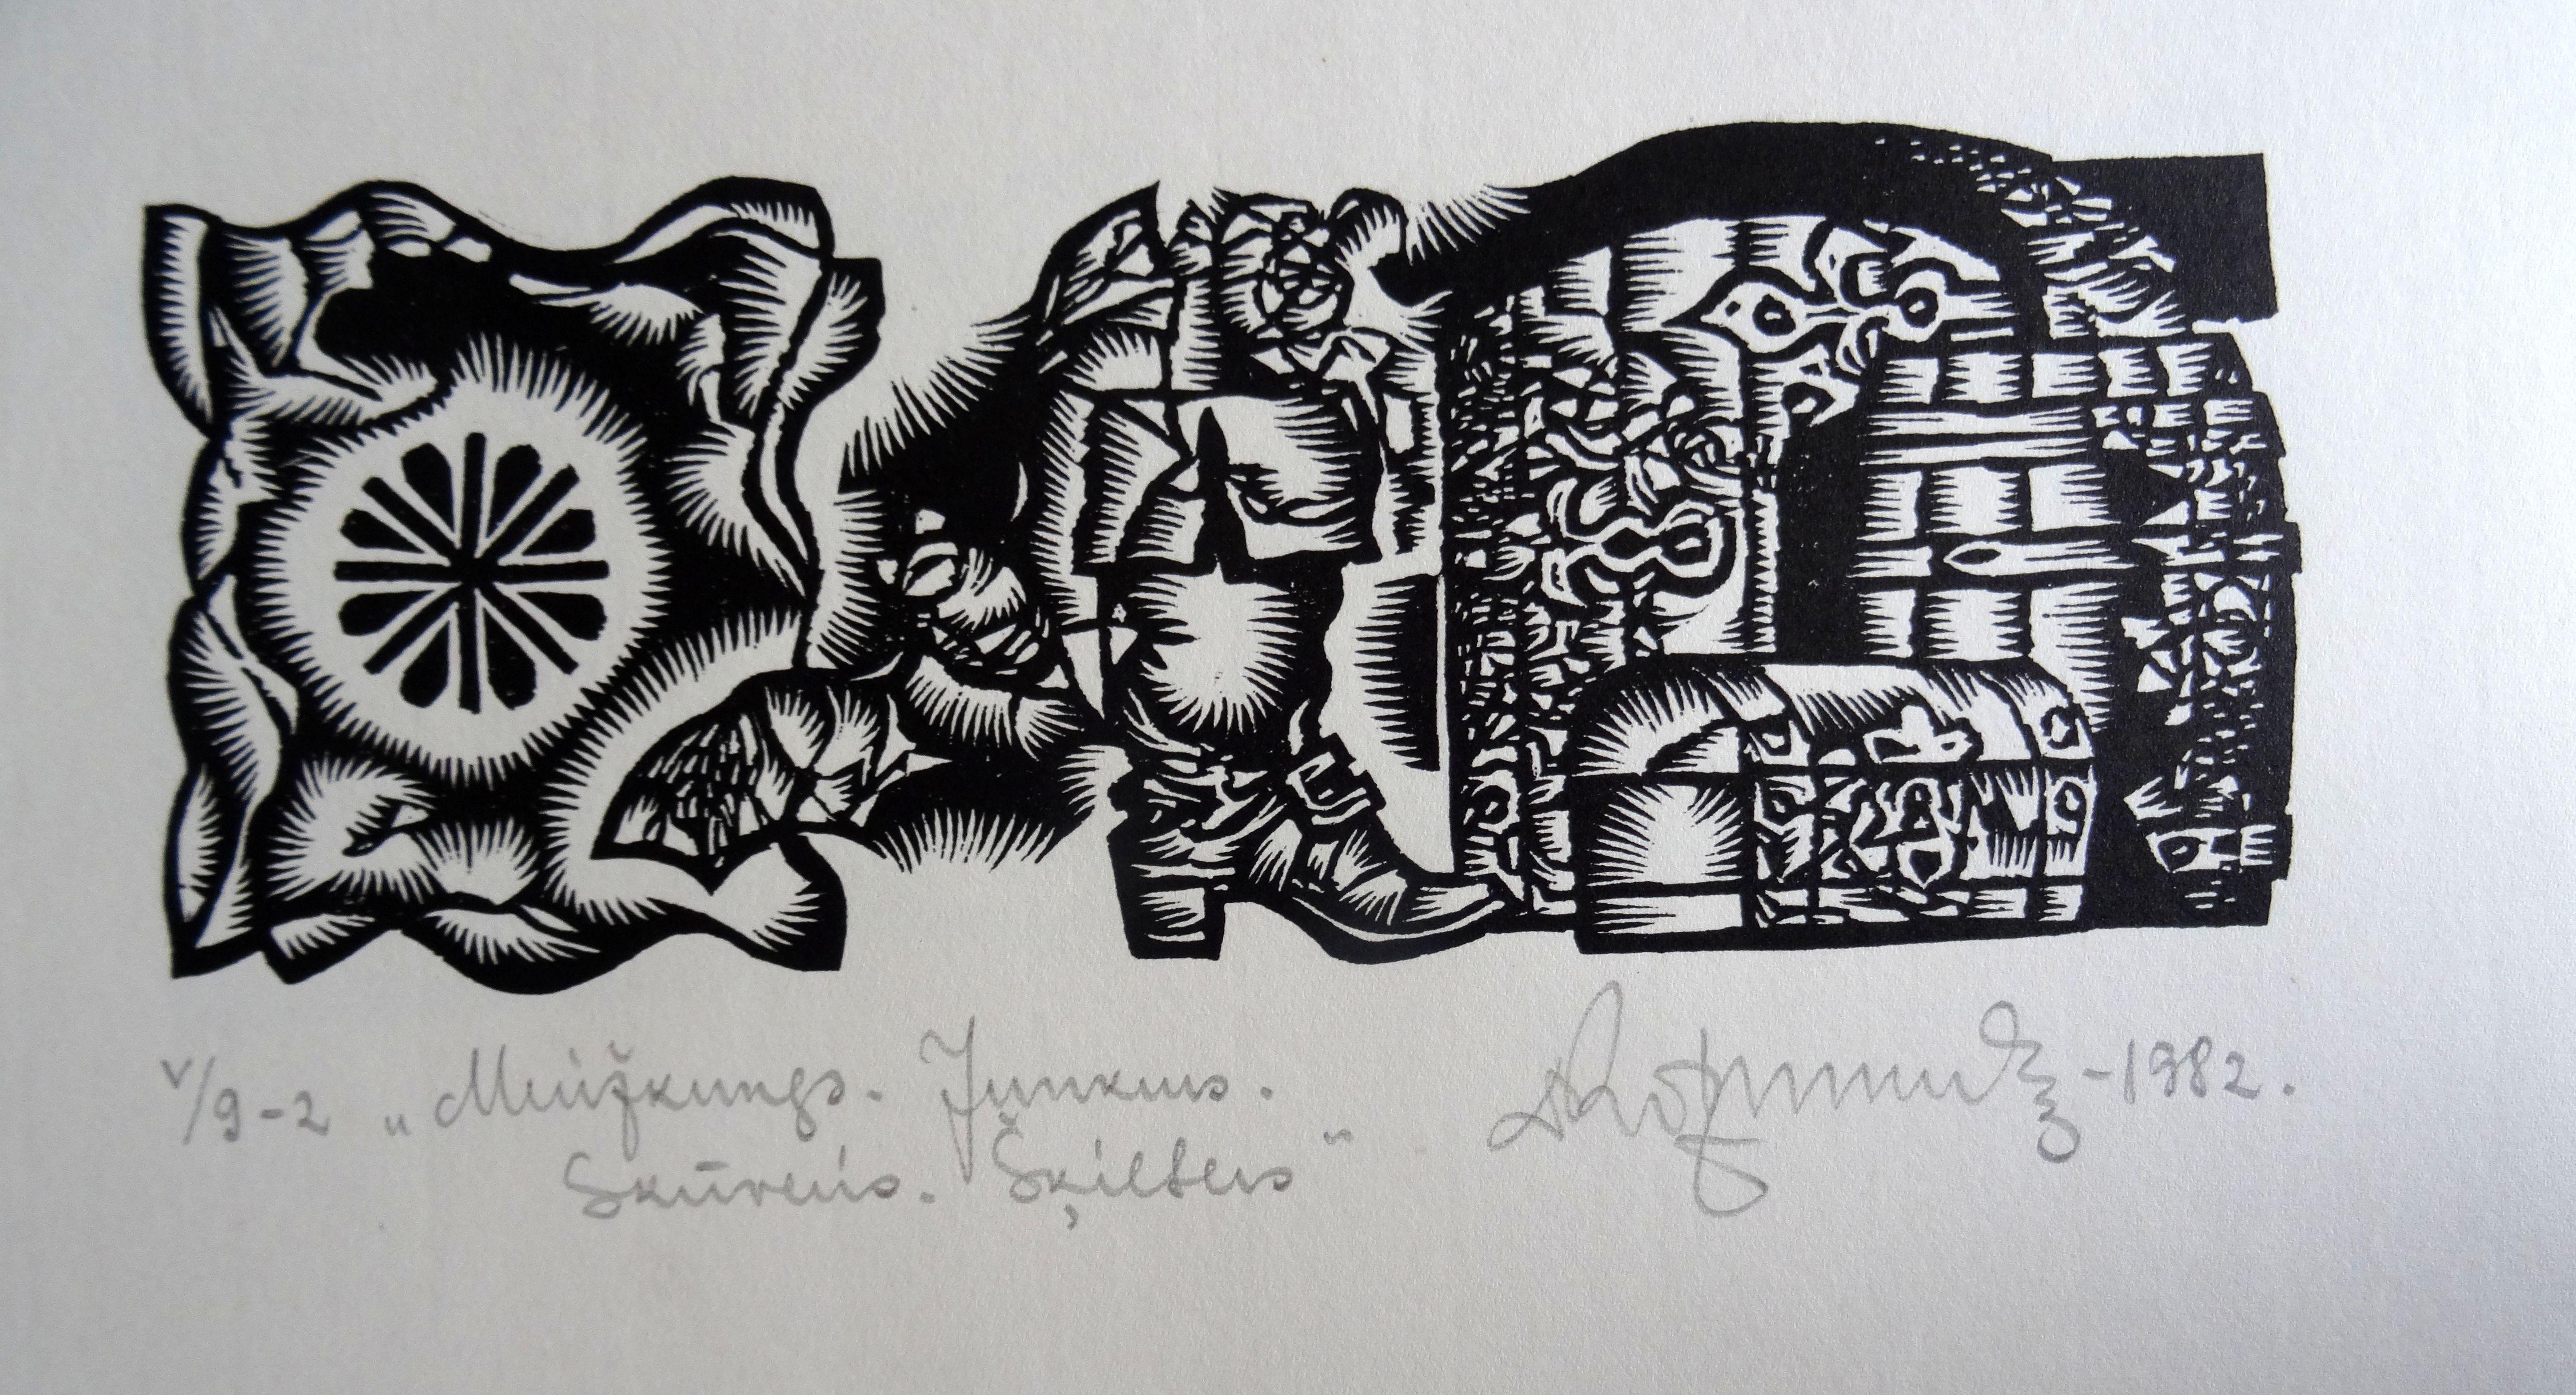 Lord of the manor. 1982. Paper, linocut, 20x34 cm